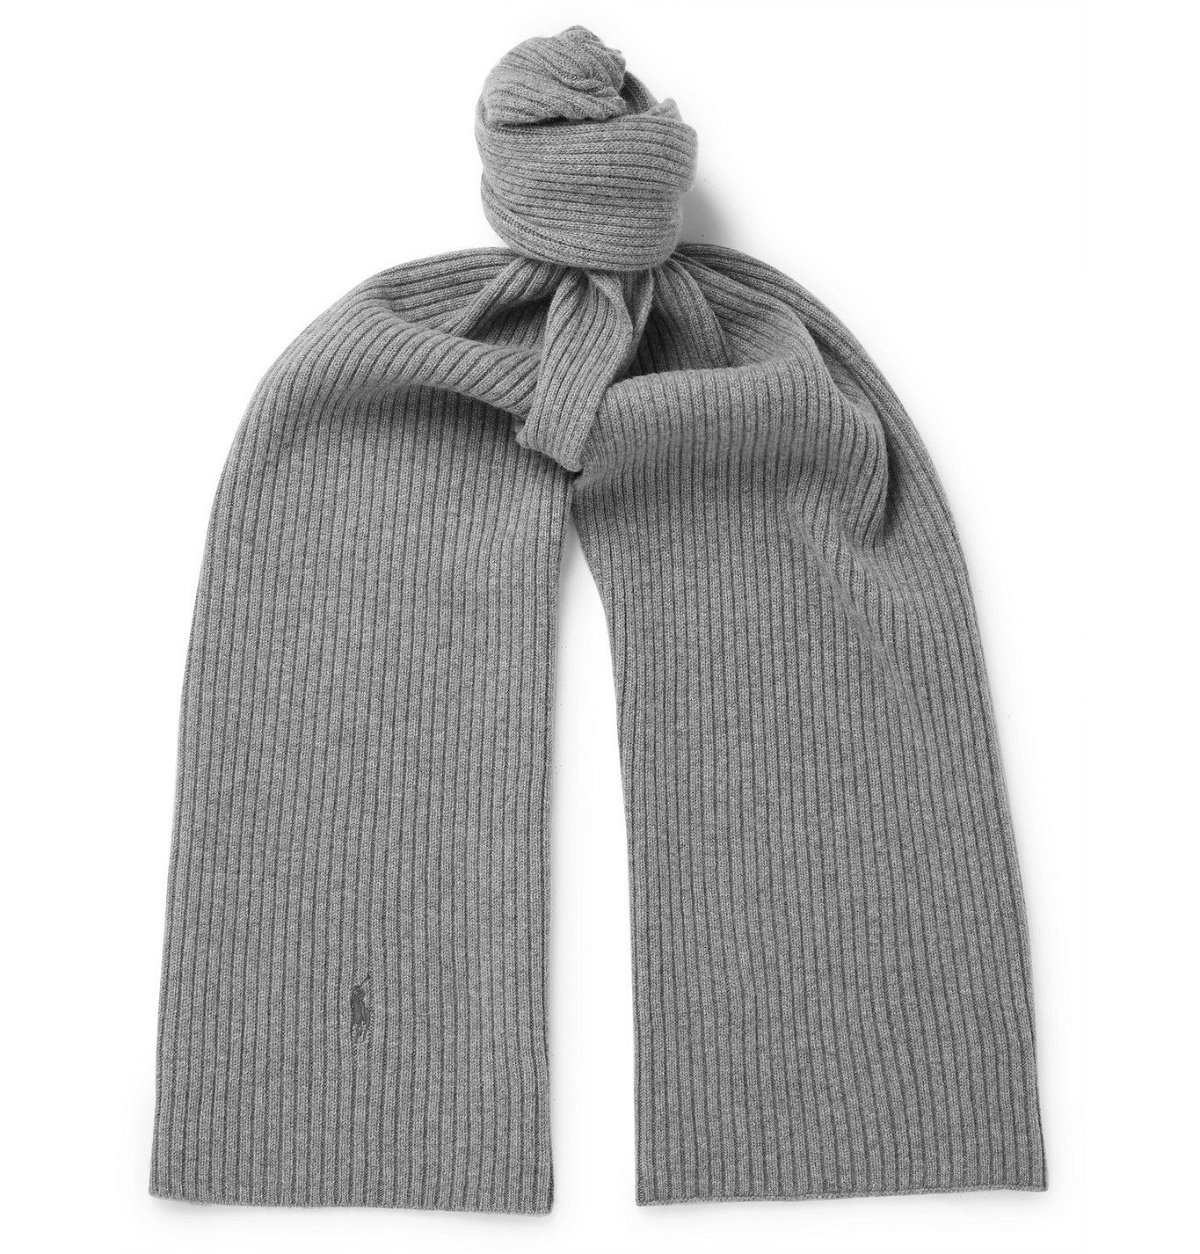 Klooster Ontstaan vrachtauto Polo Ralph Lauren - Logo-Embroidered Ribbed Wool Scarf - Gray Polo Ralph  Lauren